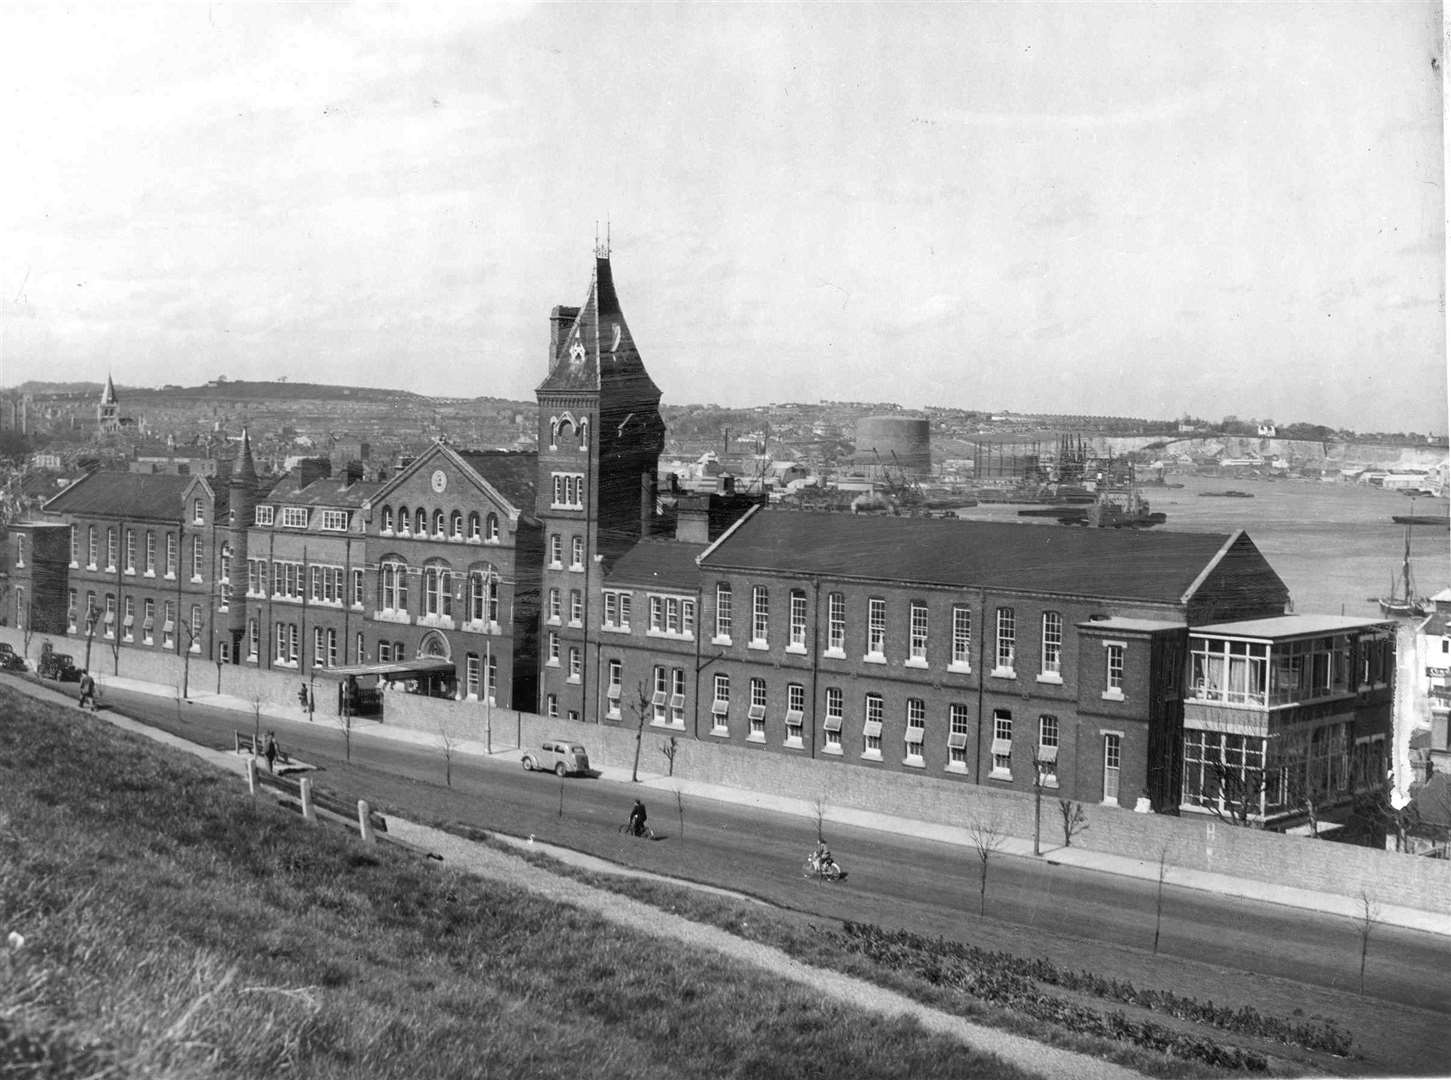 St Barts Hospital, Rochester, in April 1952. It was founded in 1078 for the care of the poor and lepers. It later became part of the NHS until it closed permanently in 2016